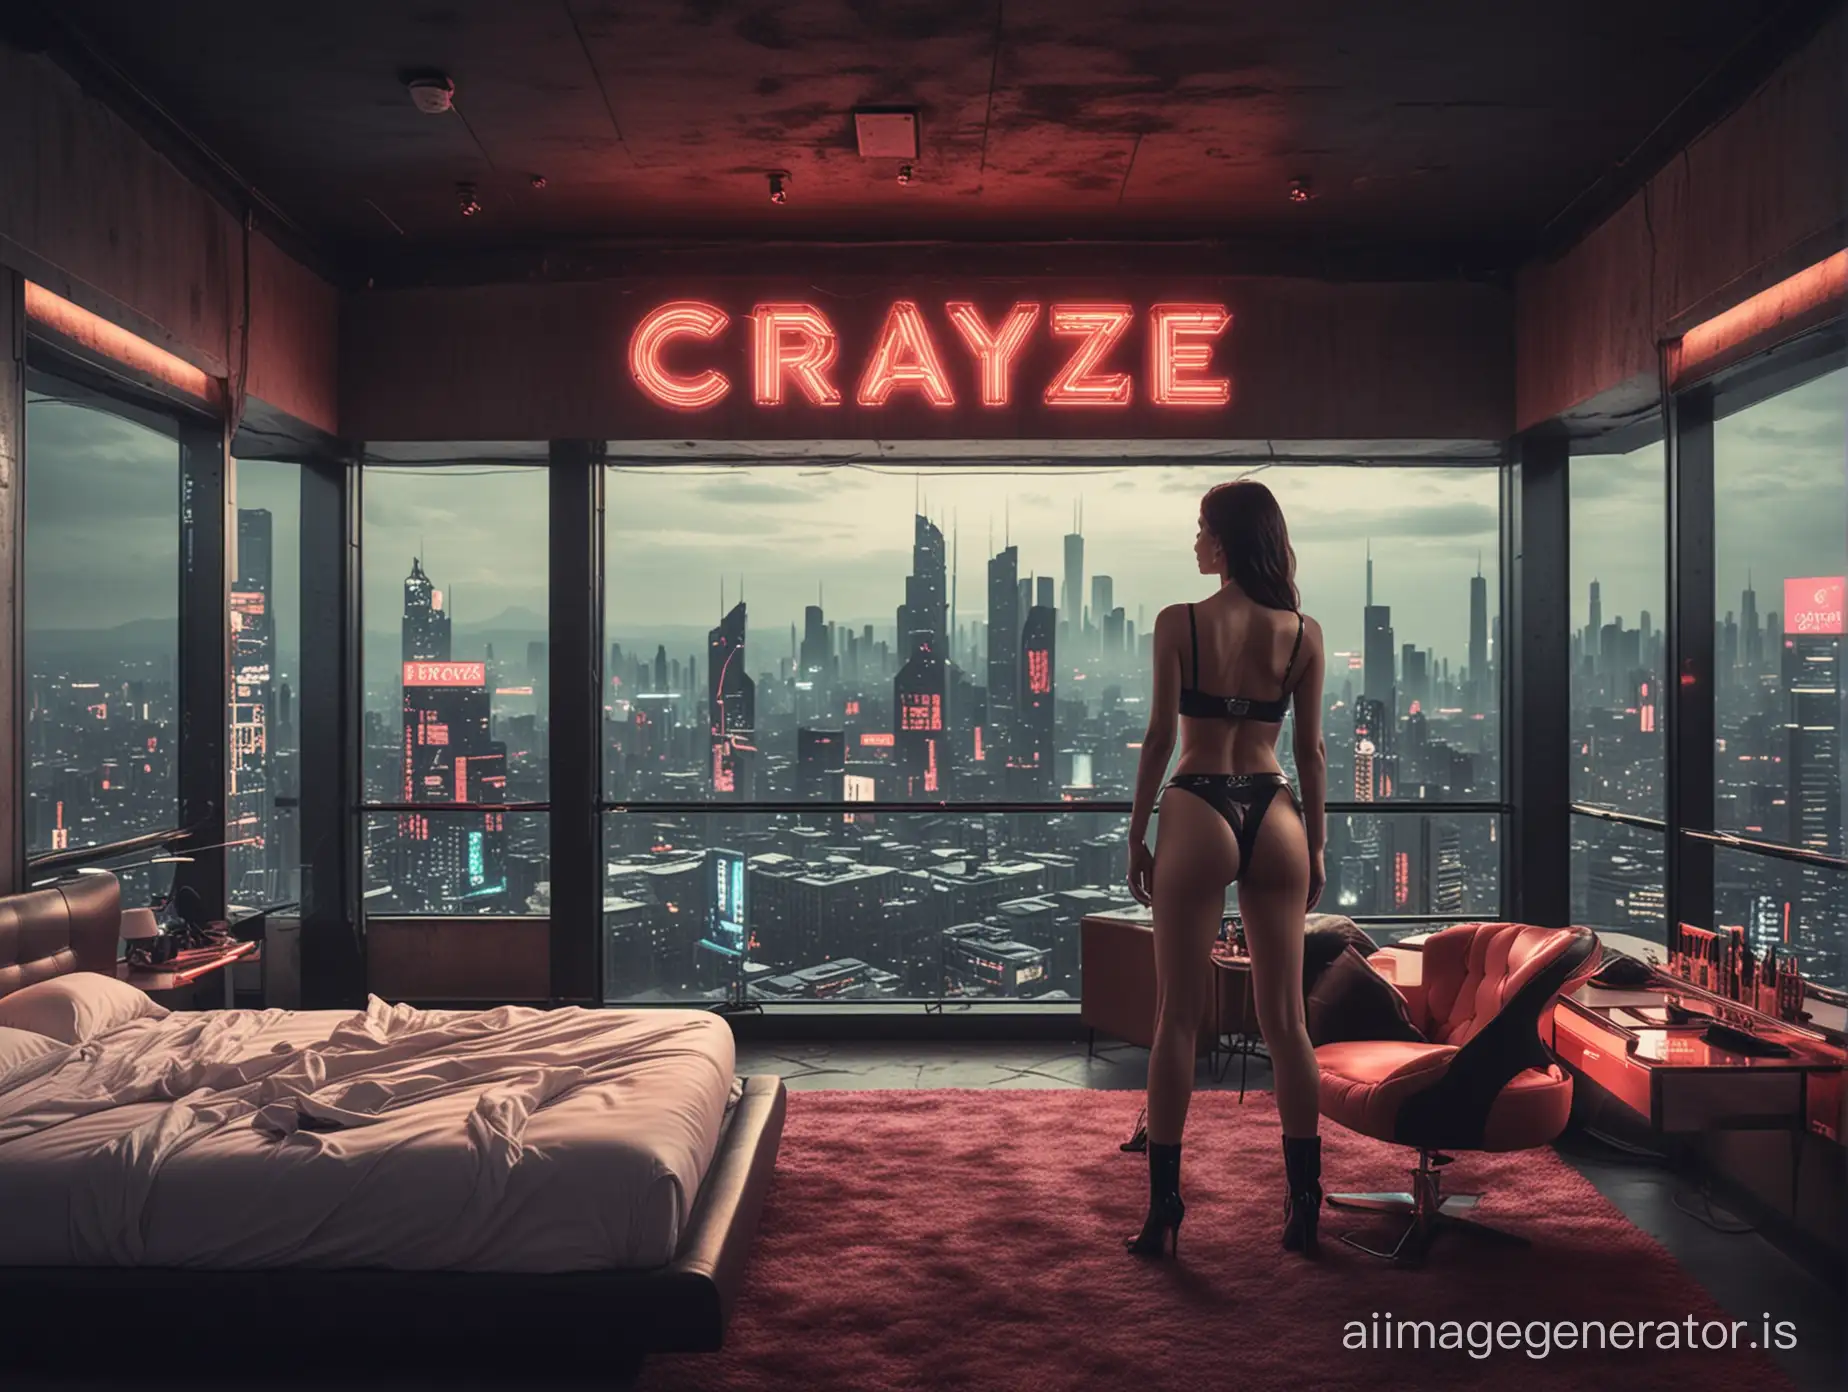 Beautiful escort hookers in futuristic hotel room overlooking dystopian cityscape with massive neon sign branding of CRAYZE logo